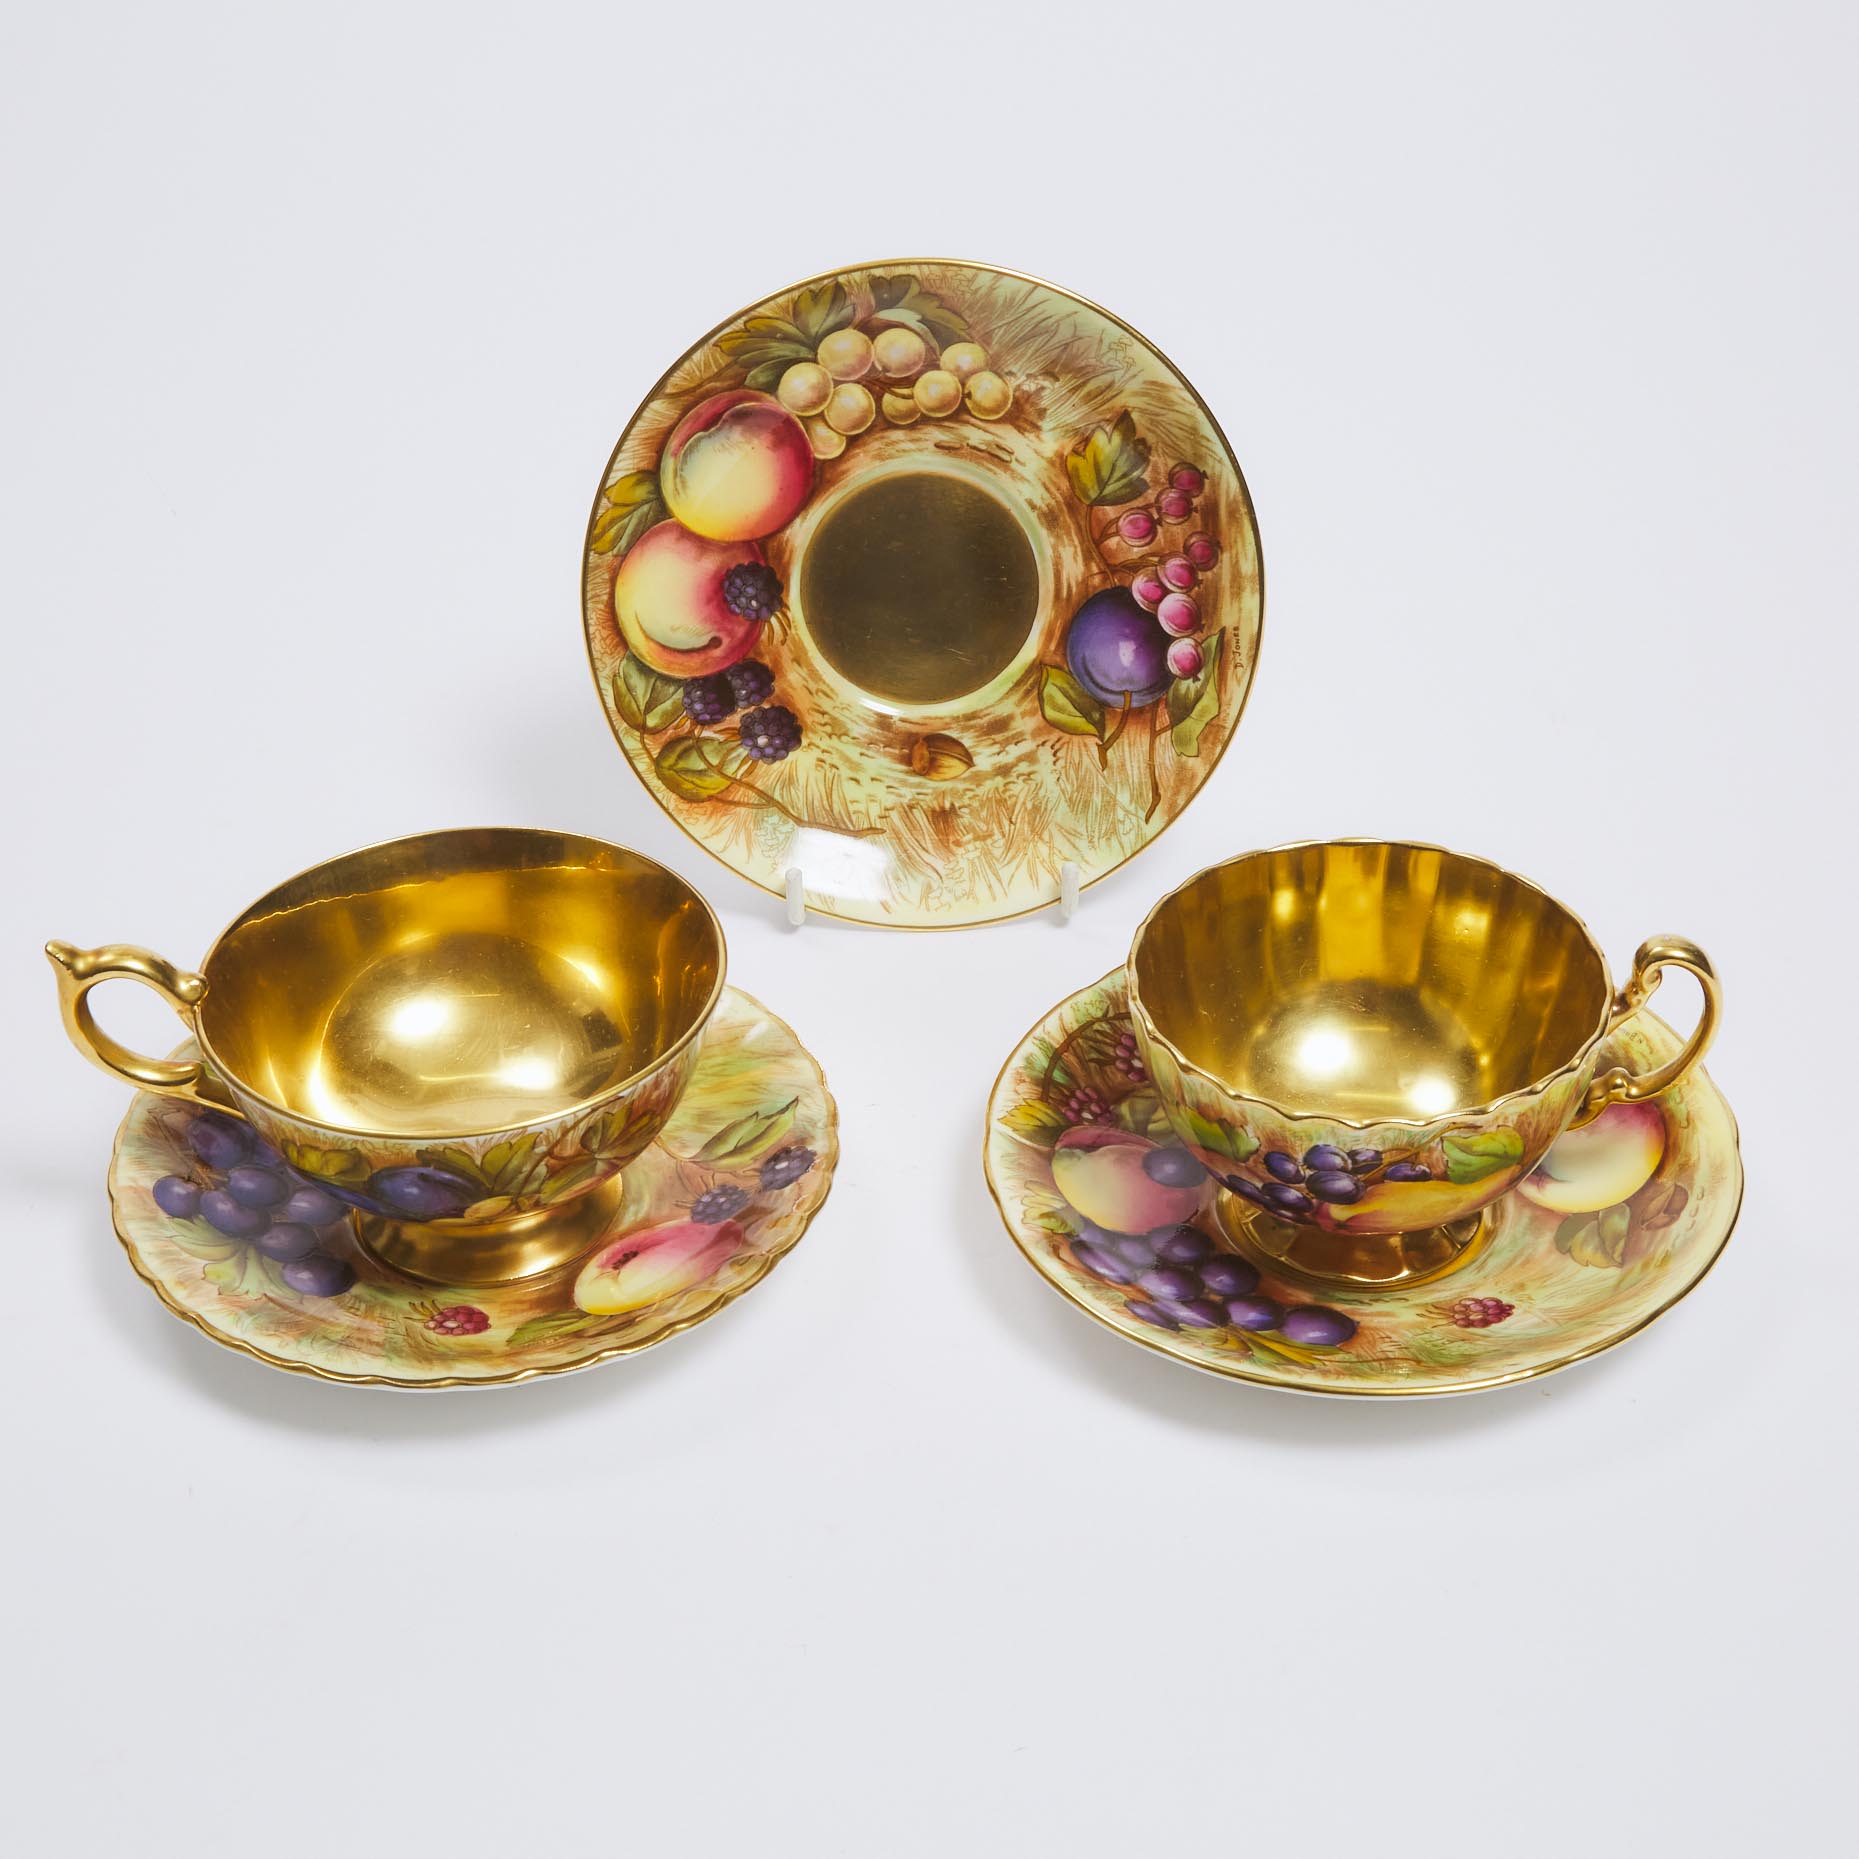 Two Aynsley 'Orchard Gold' Cups and Three Saucers, D. Jones and N. Brunt, 20th century